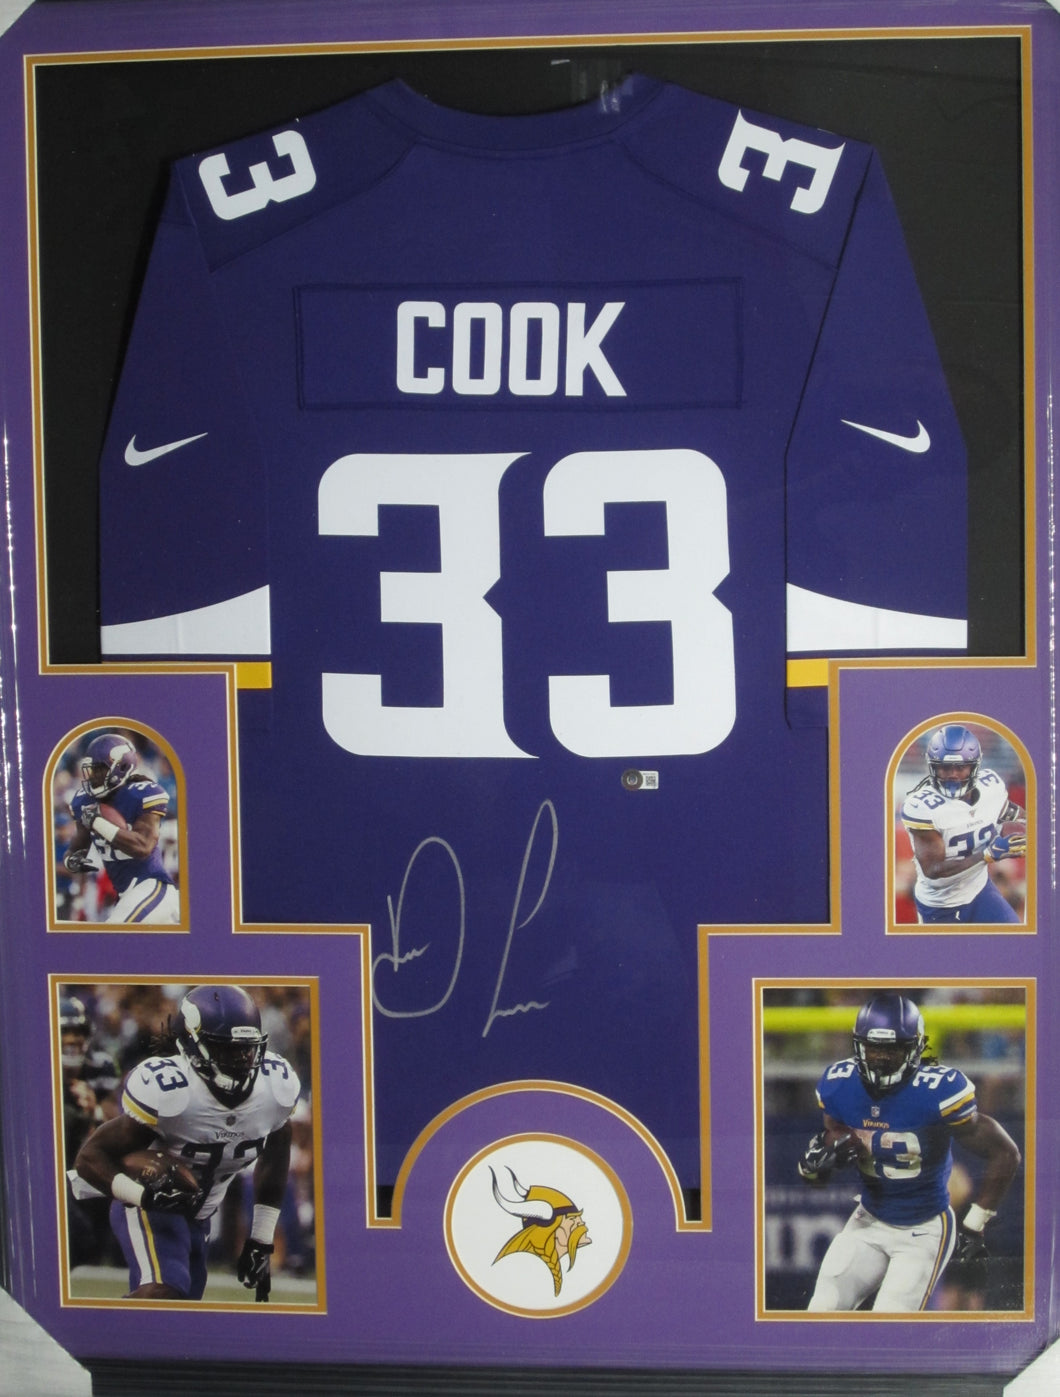 Minnesota Vikings Dalvin Cook Signed Jersey Framed & Matted with BECKETT COA